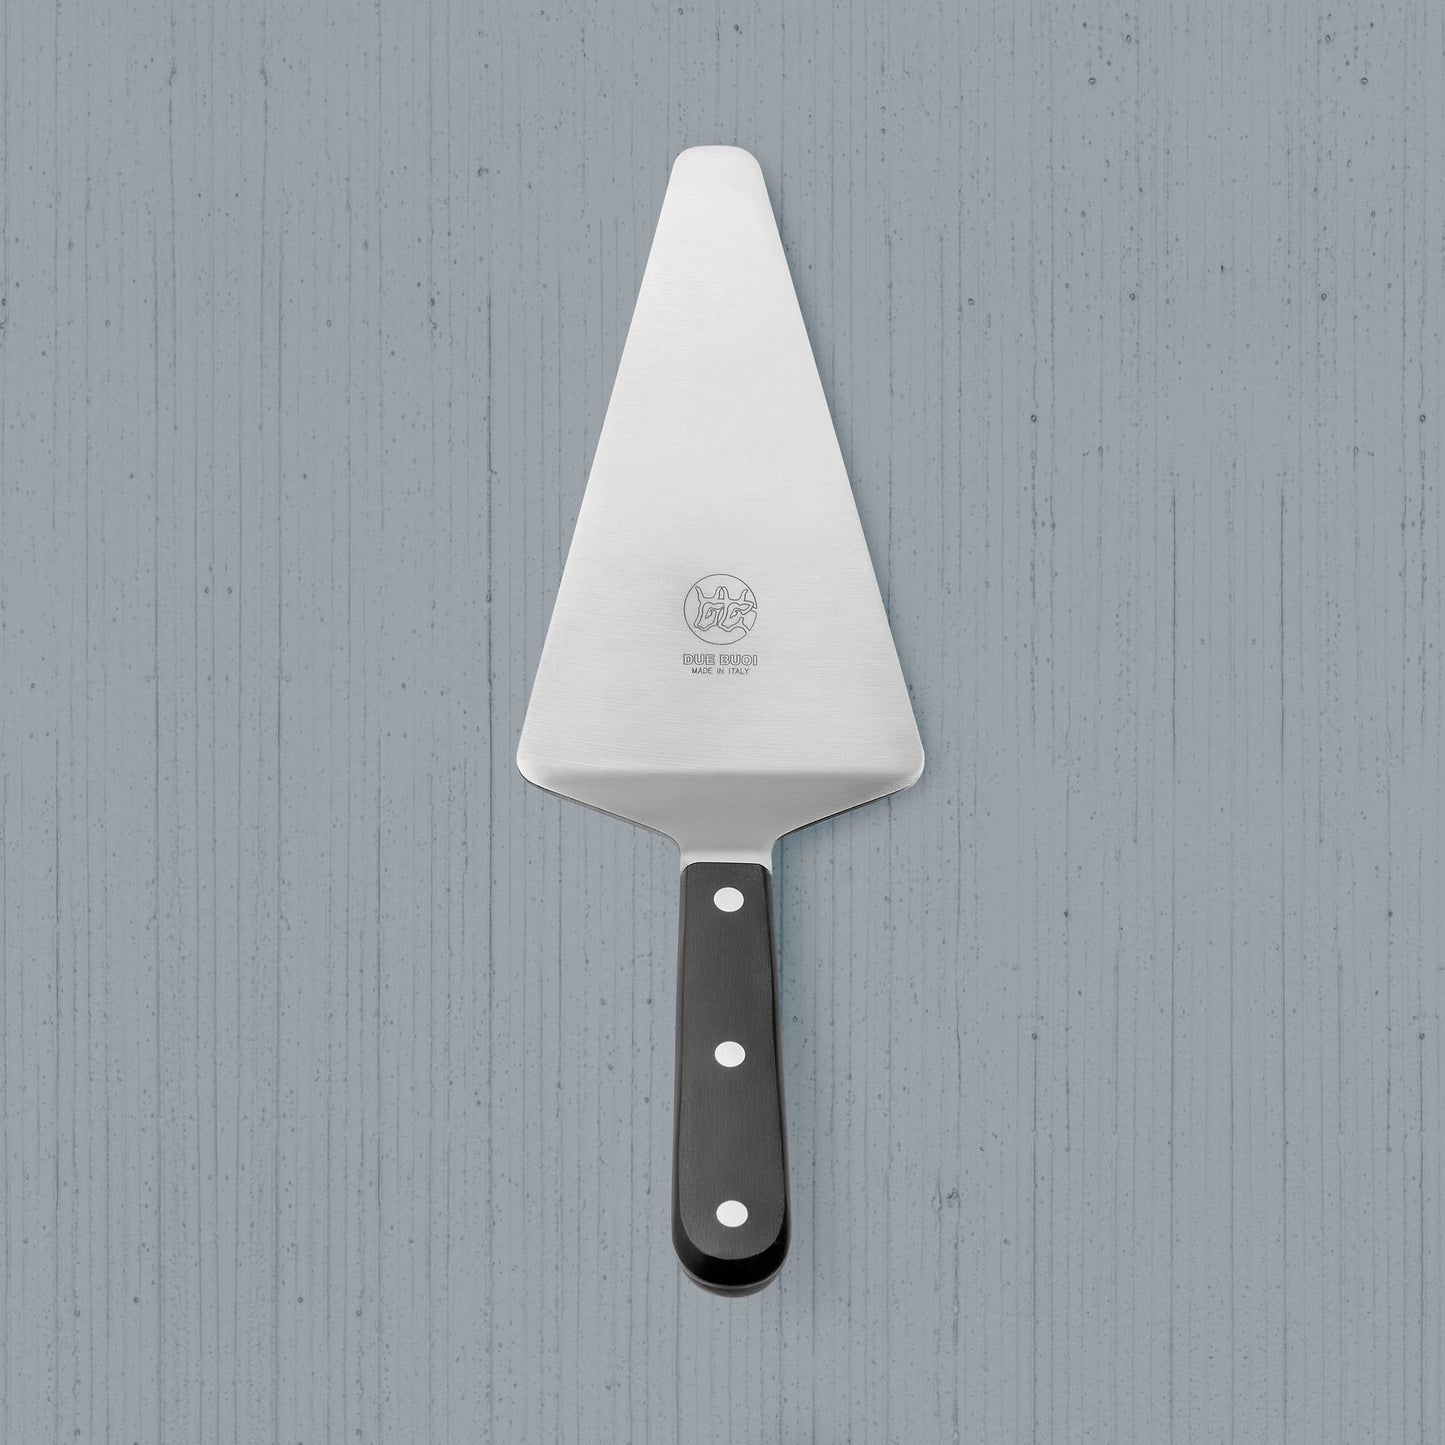 Pizza Spatula for OEM/ ODM/ OBM service - Trendware Products